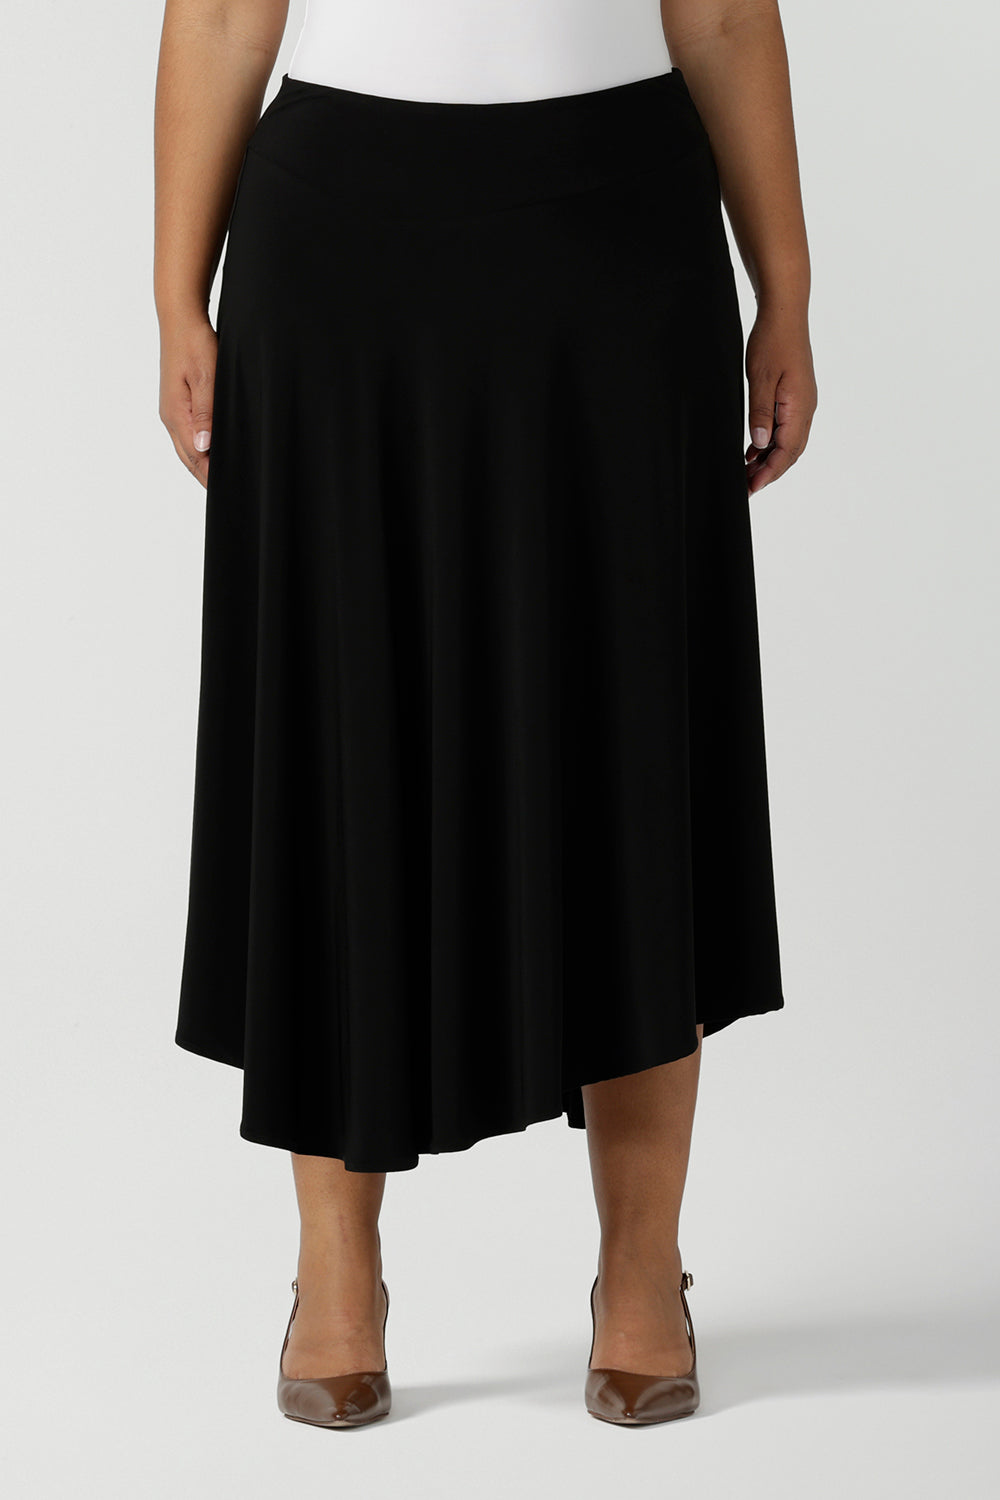 A size 18, plus size woman wears an asymmetric skirt in black jersey. This easy-care, comfortable jersey skirt works for work wear and eveningwear. Made in Australia by women's clothing brand, Leina & Fleur in petite, mid size and plus sizes. 